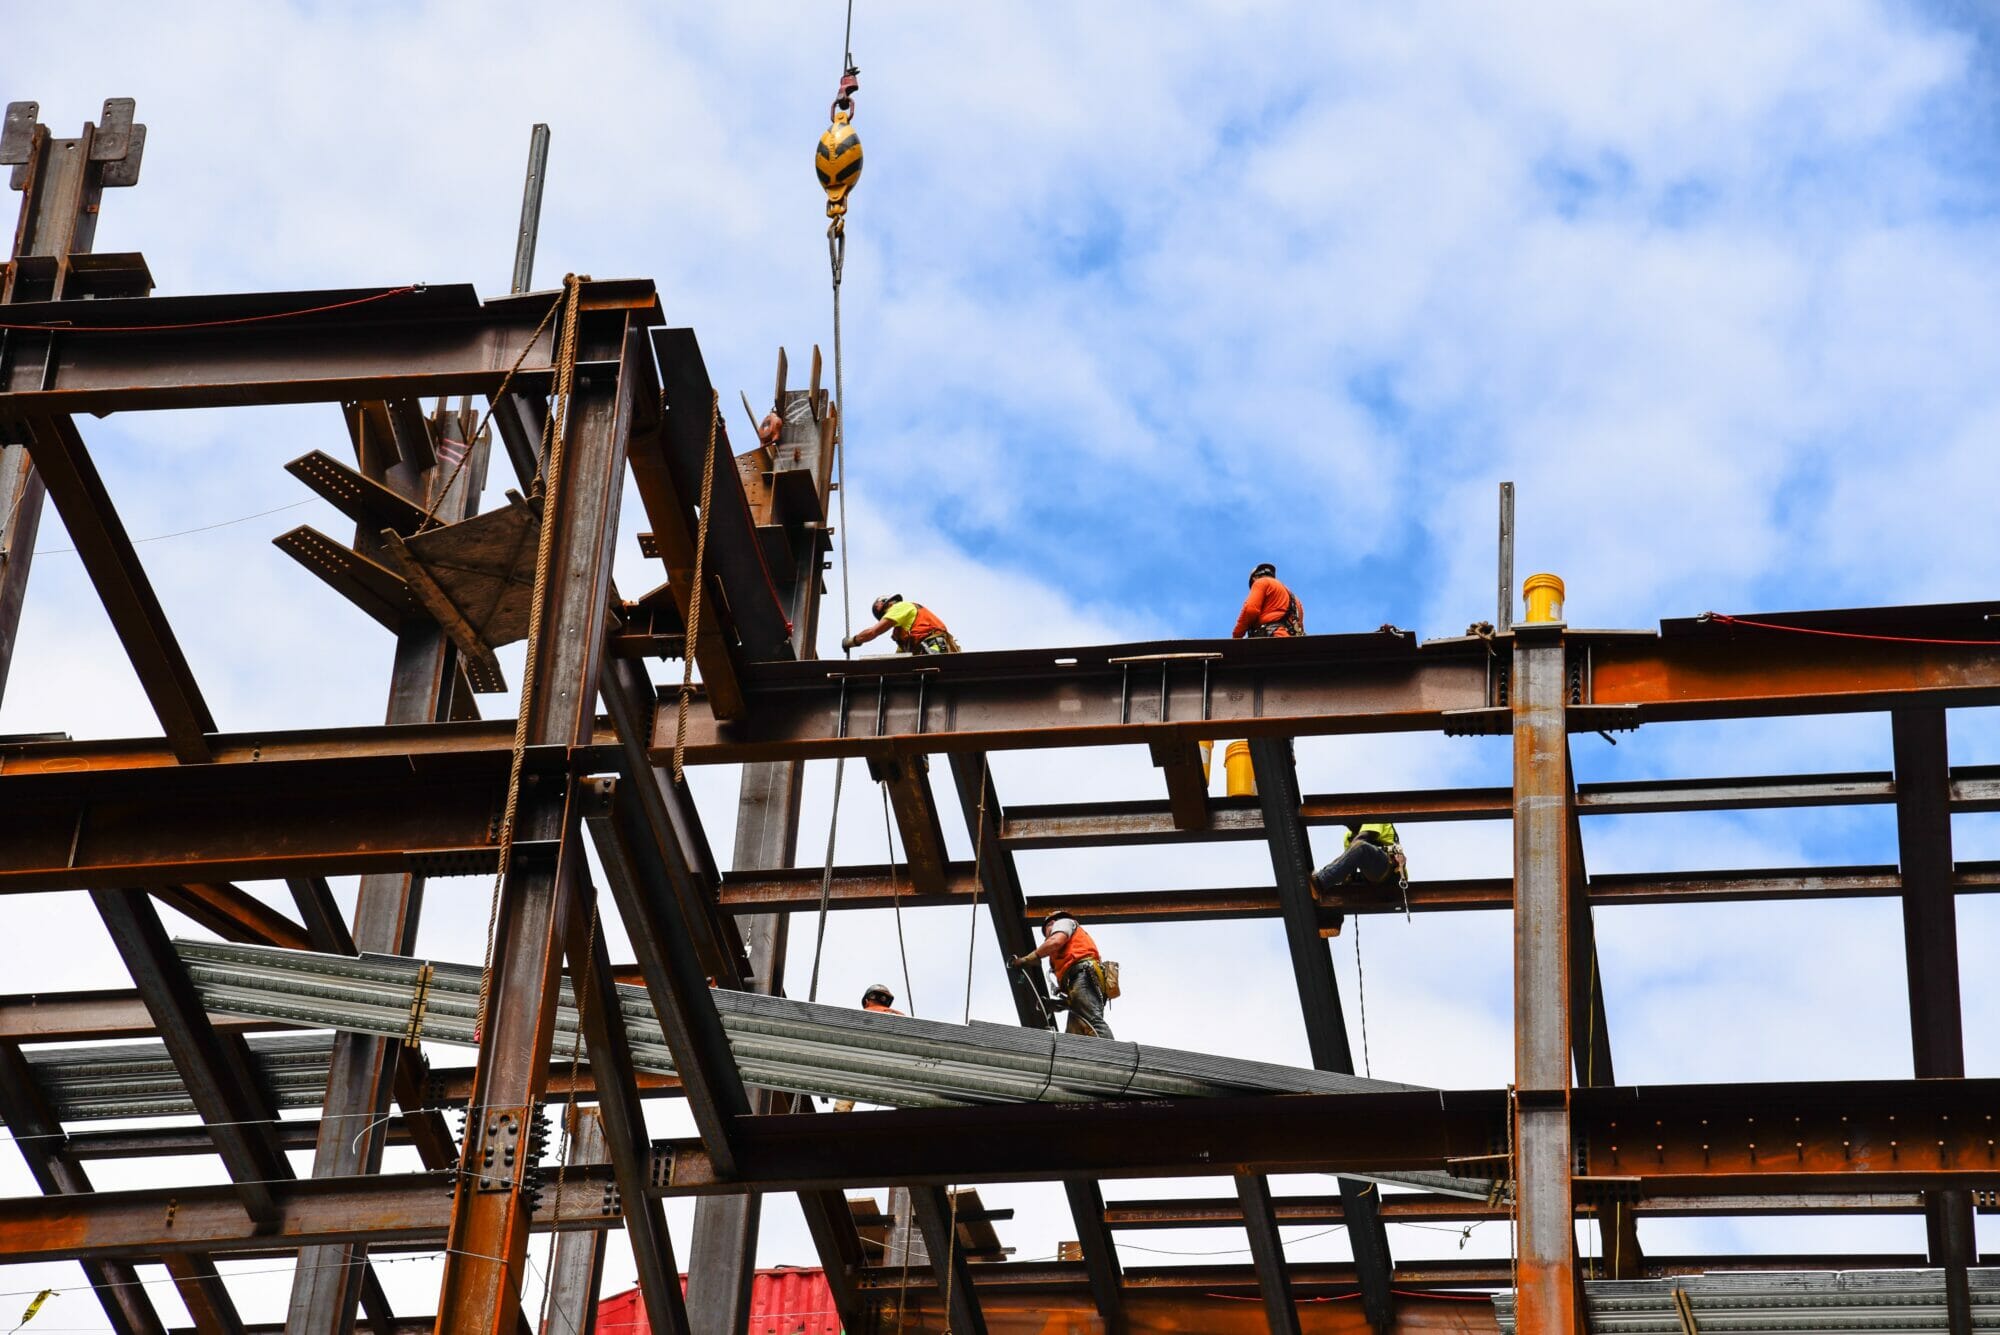 Construction workers on steel beams in construction site